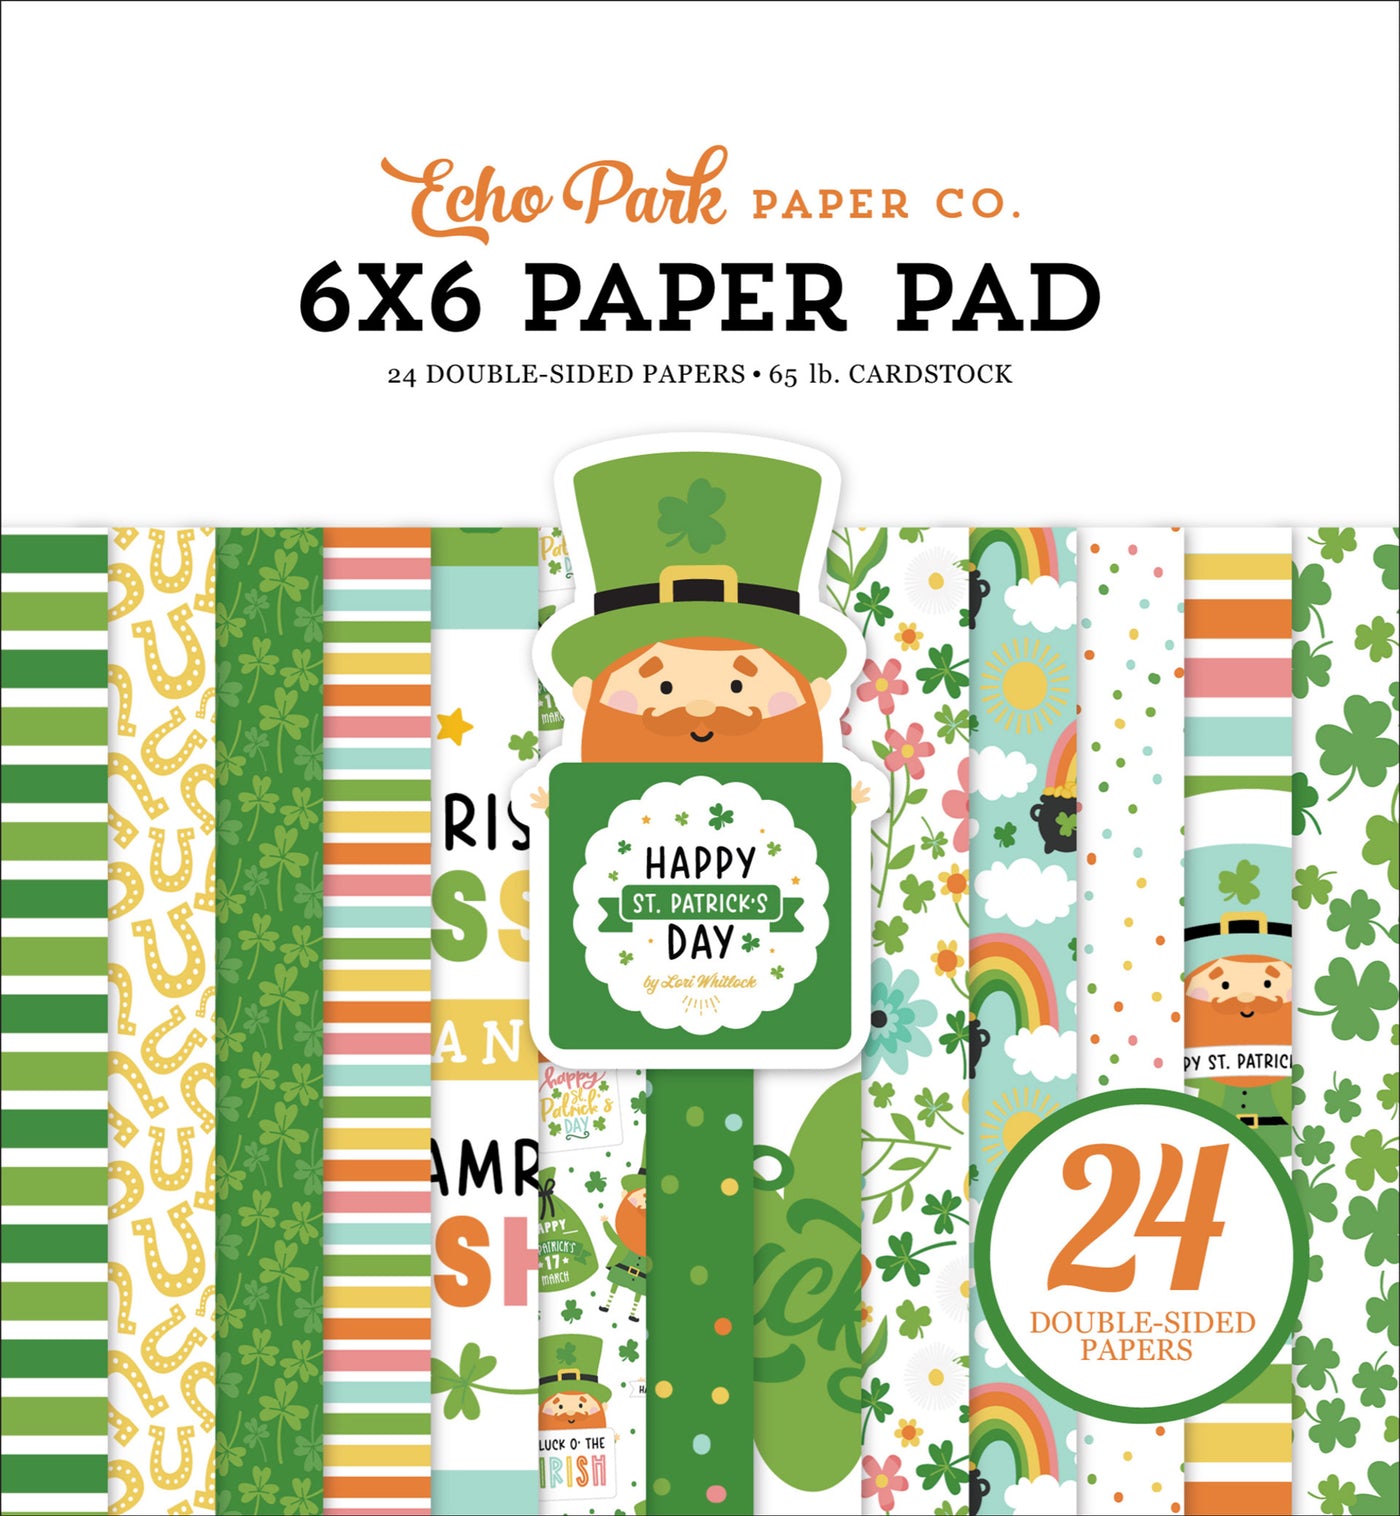 Twenty-four double-sided pages of St. Patrick's Day themes in bright, fun colors. 6x6 pad is convenient to use for card making and other paper crafts. Lori Whitlock designed them.